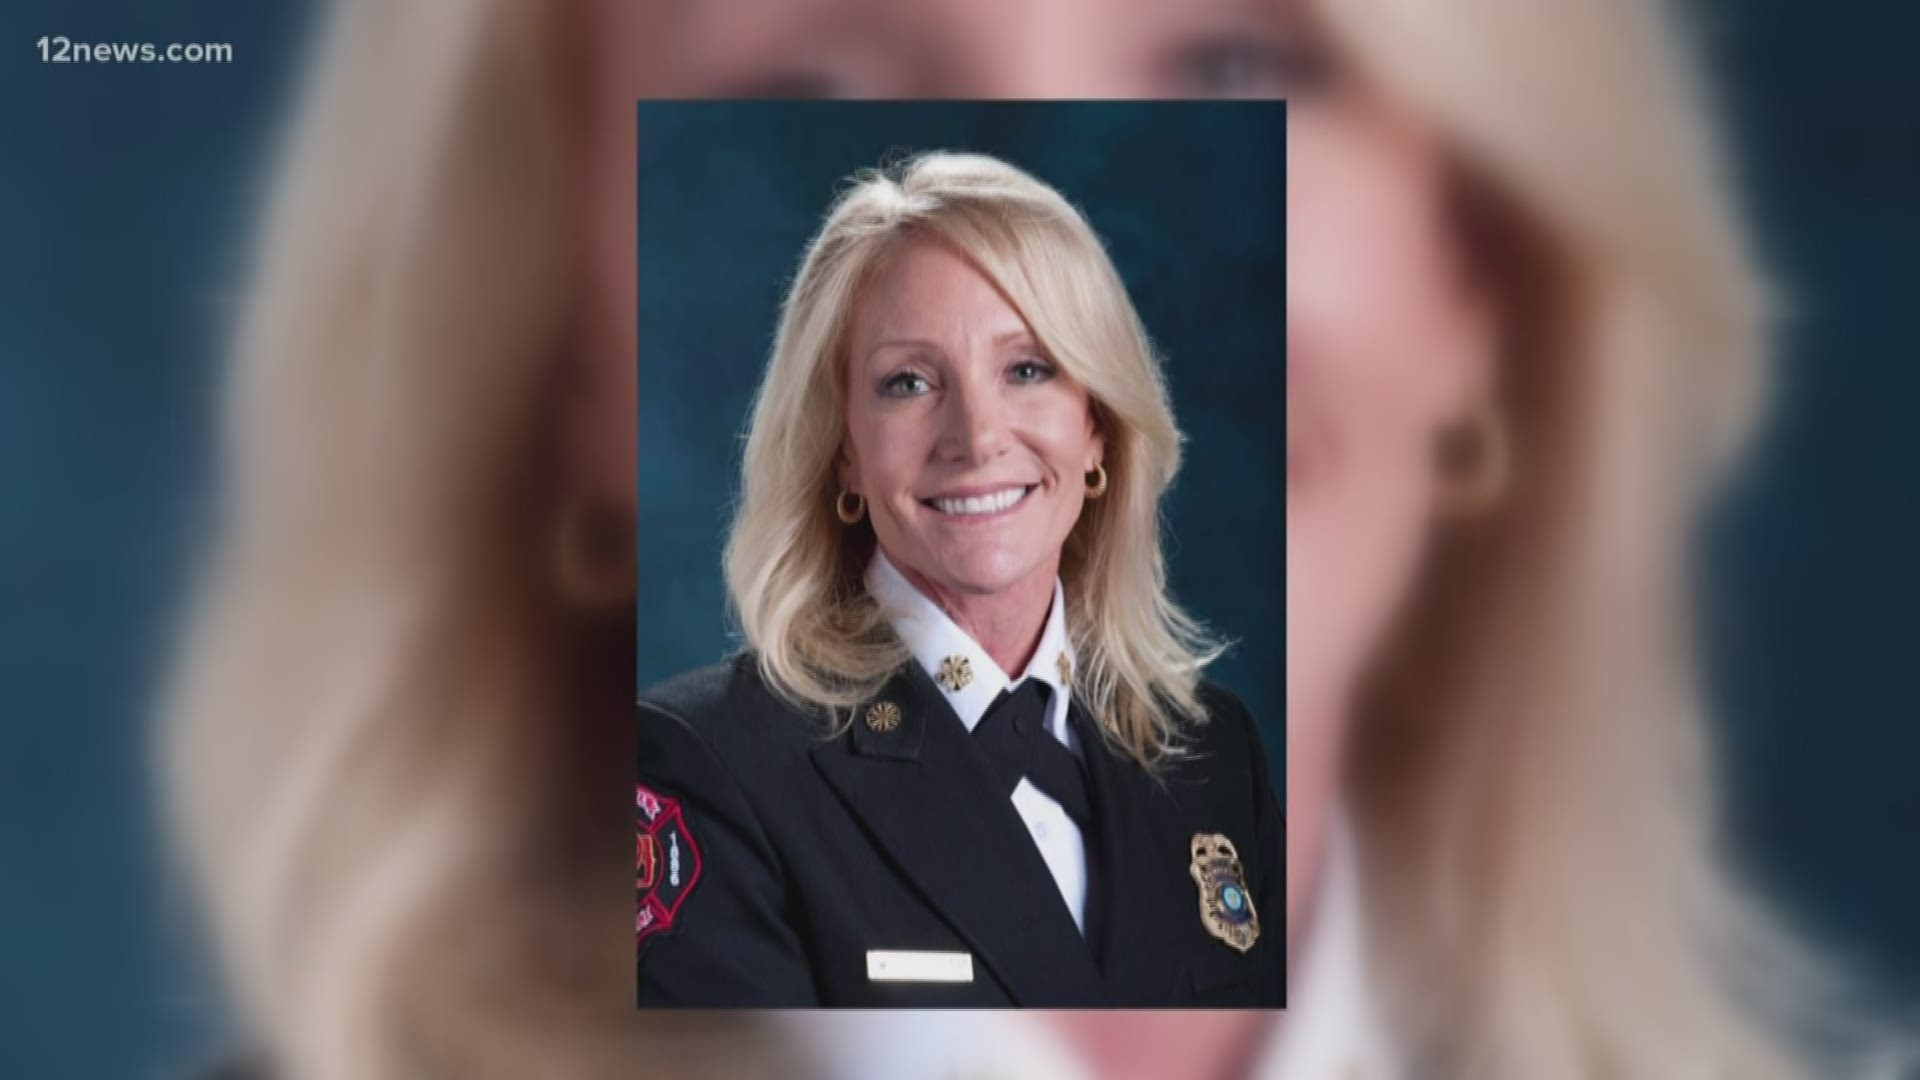 For 30 years Kara Kalkbrenner has done it all from fighting fires to becoming the first woman to serve as Phoenix Fire Chief. And now she takes on a new battle.